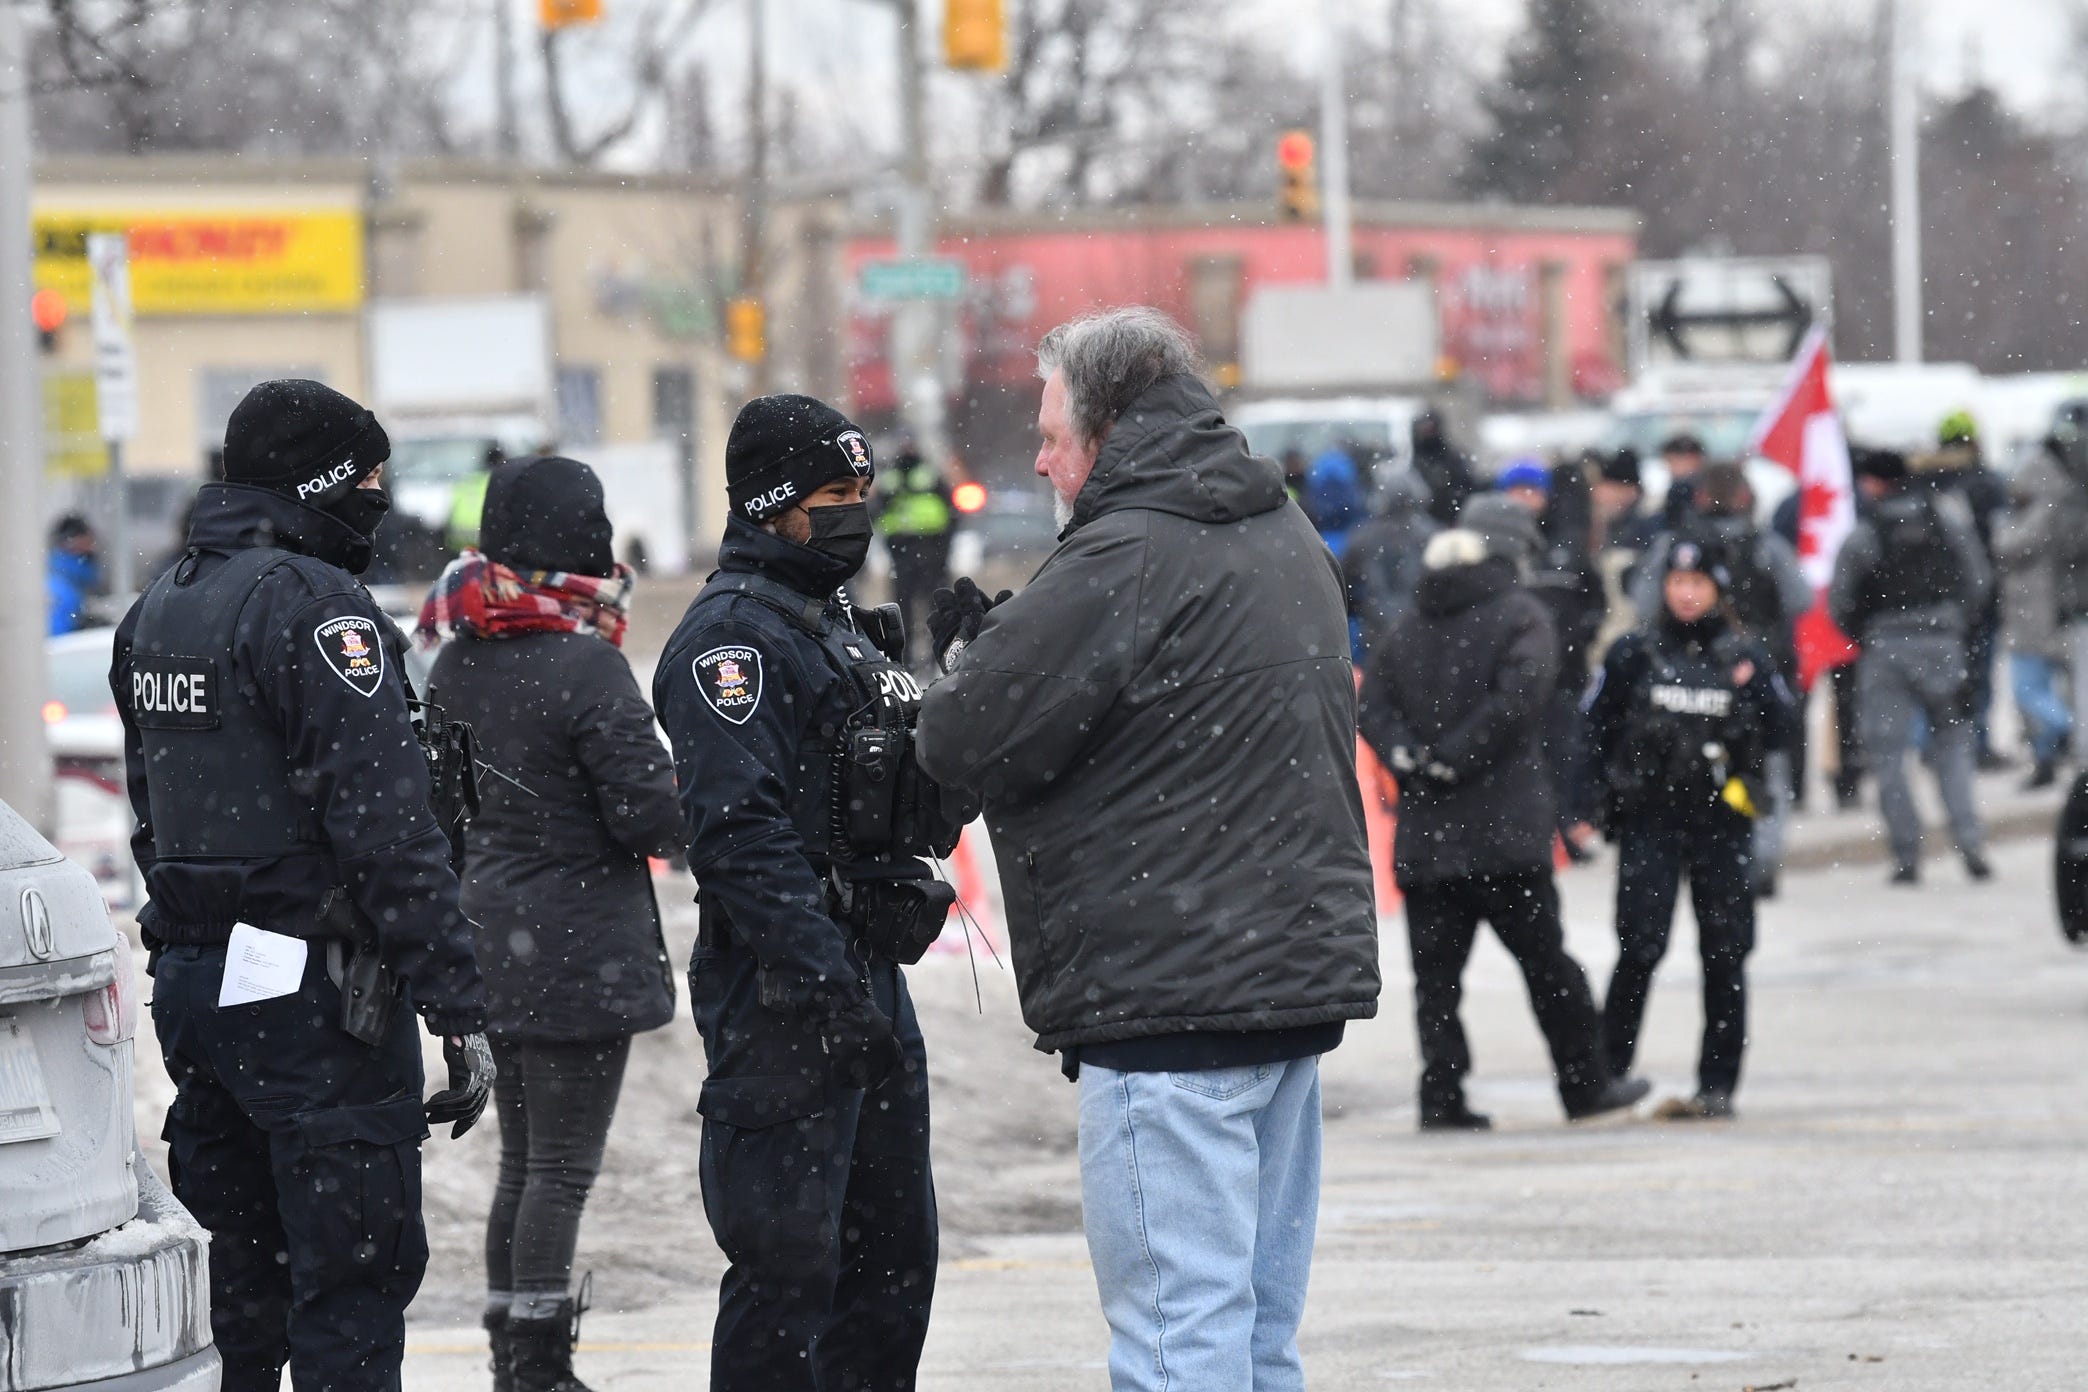 Windsor and London Police officers inform people parked in a lot on Huron Church Road that they cannot stay parked unless they are using the businesses and will be towed. This is not far from Ambassador Bridge in Windsor, Ontario, on Feb. 13, 2022.